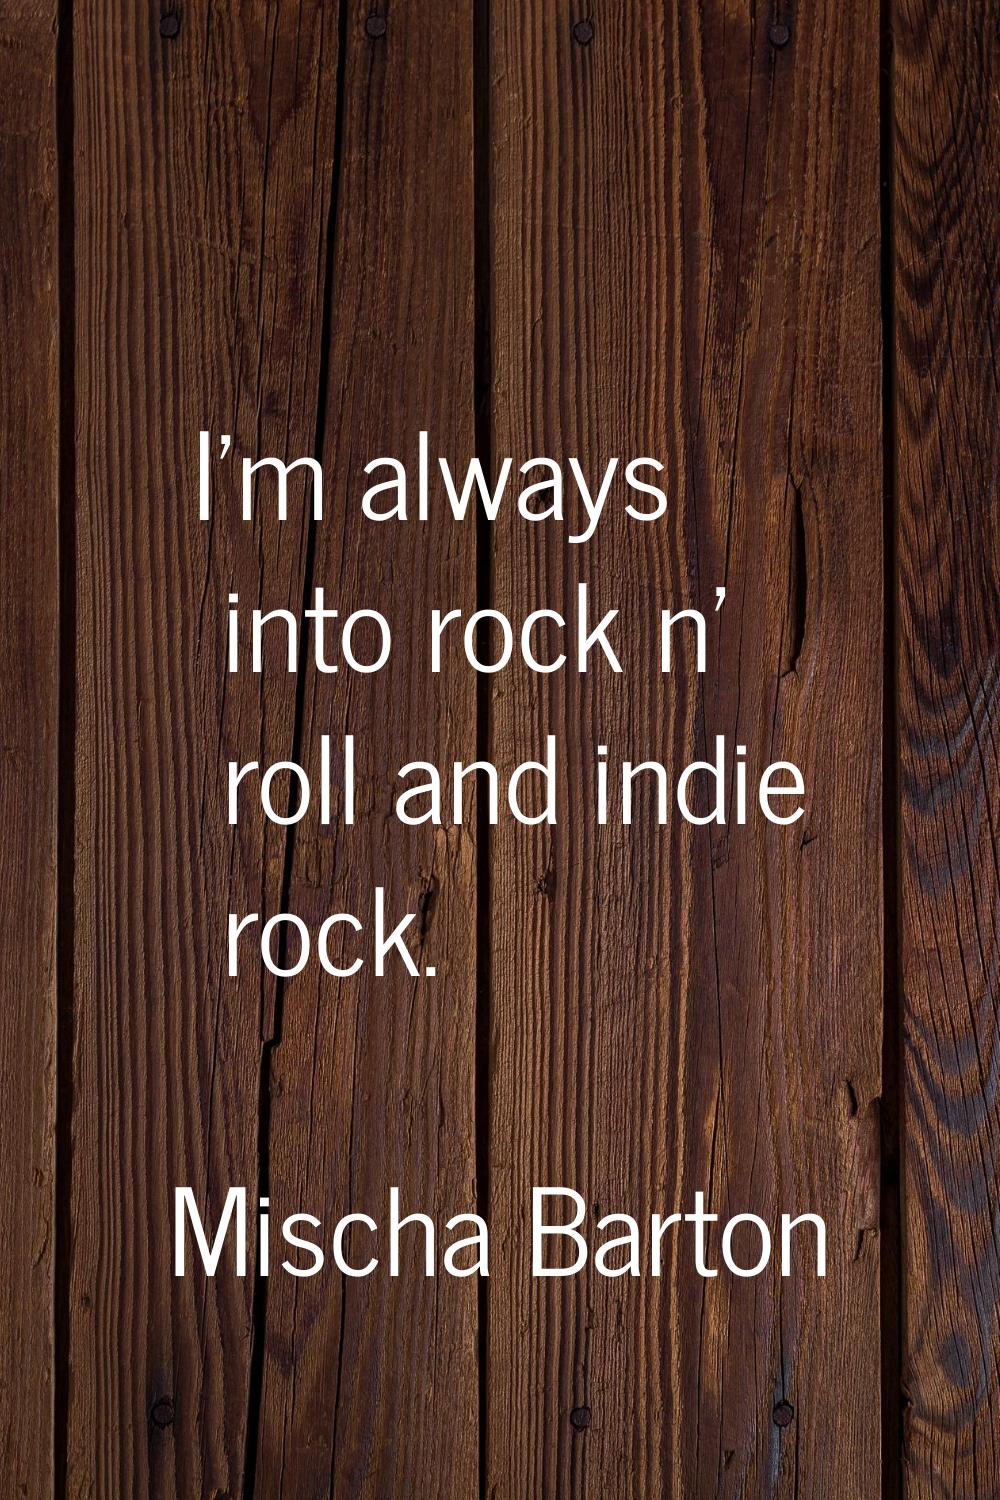 I'm always into rock n' roll and indie rock.